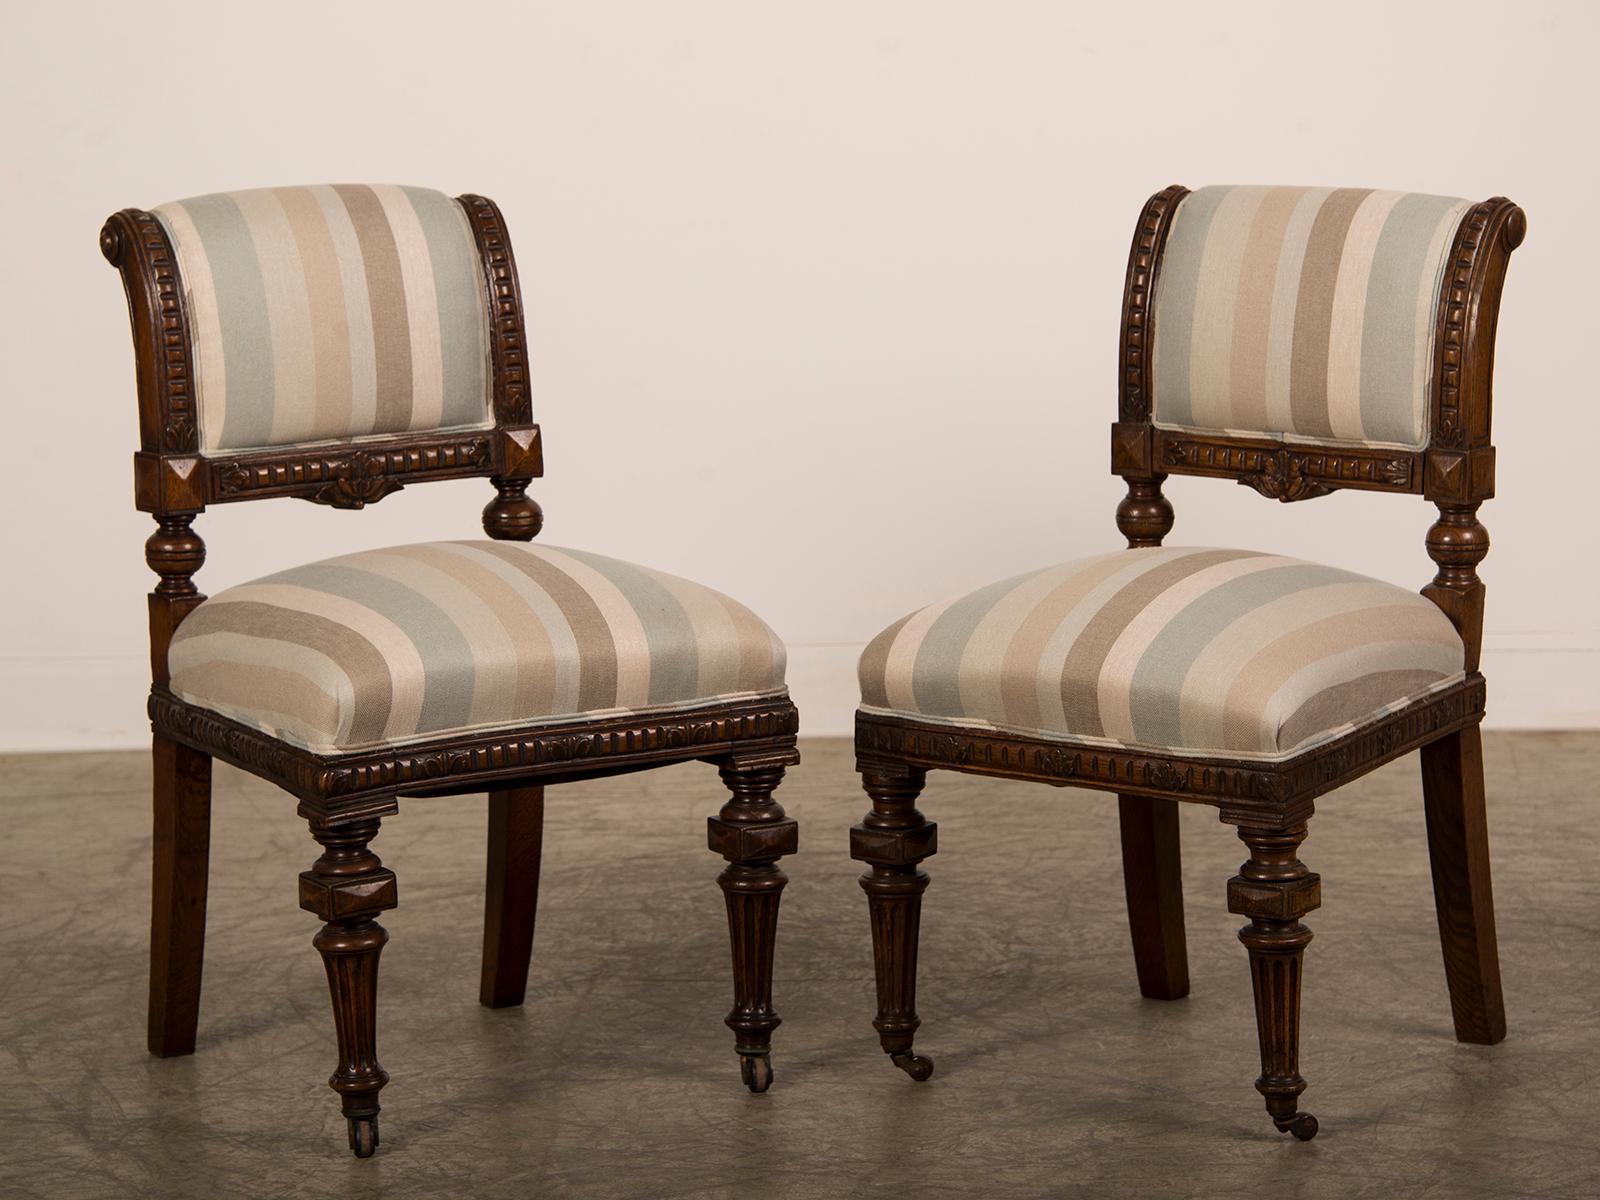 Carved Pair of Antique English William IV Style Oak Chairs, England, circa 1875